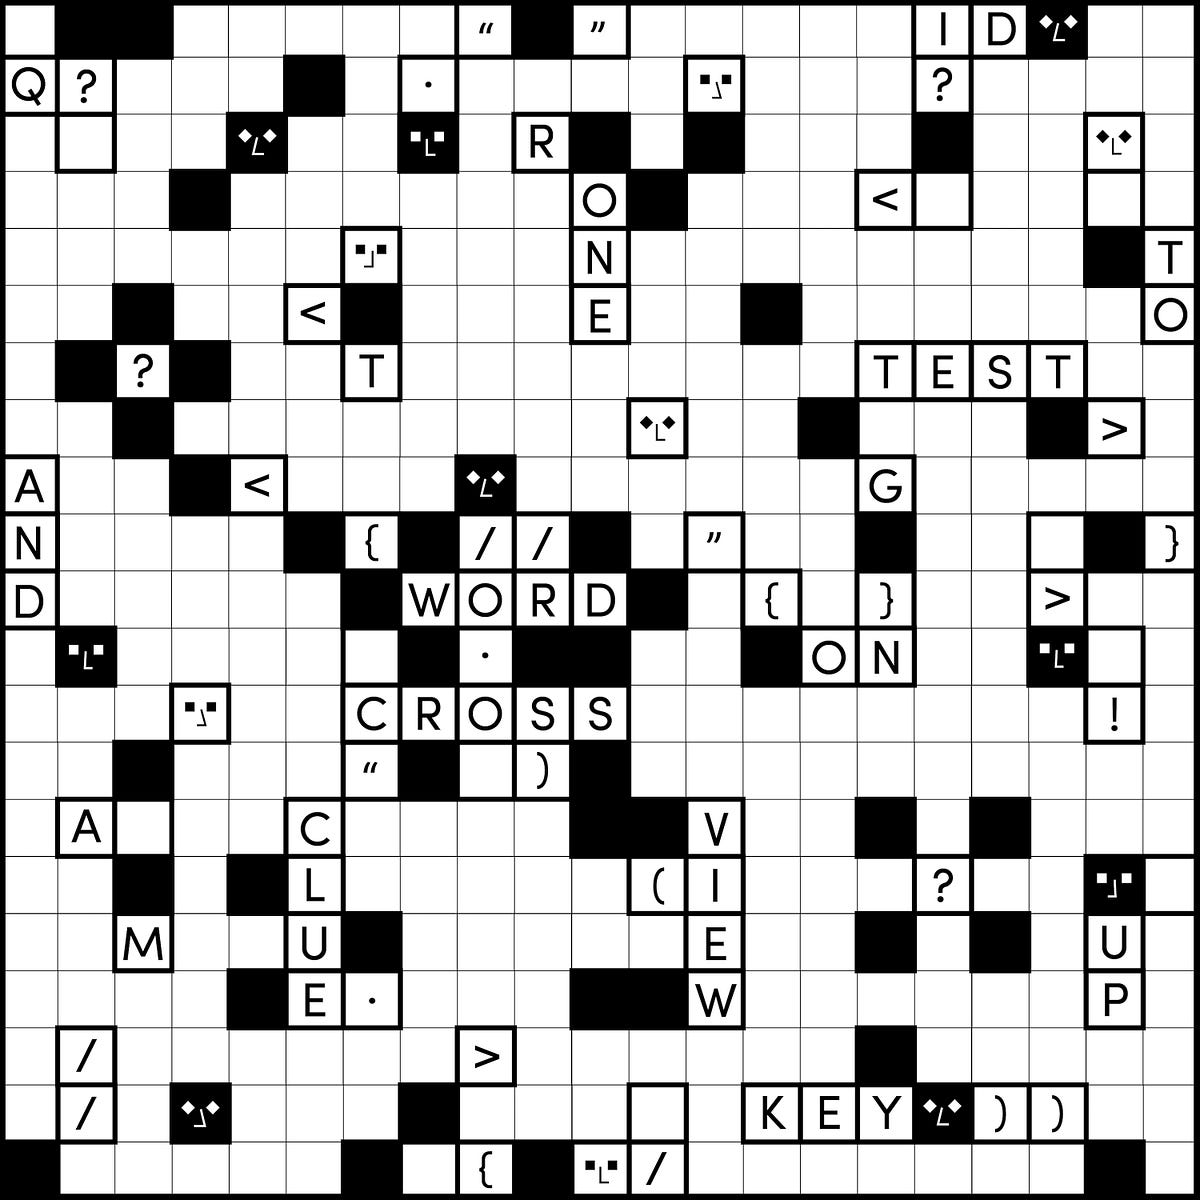 Across Down Diagonal How We Test Crossword Puzzles on Android by